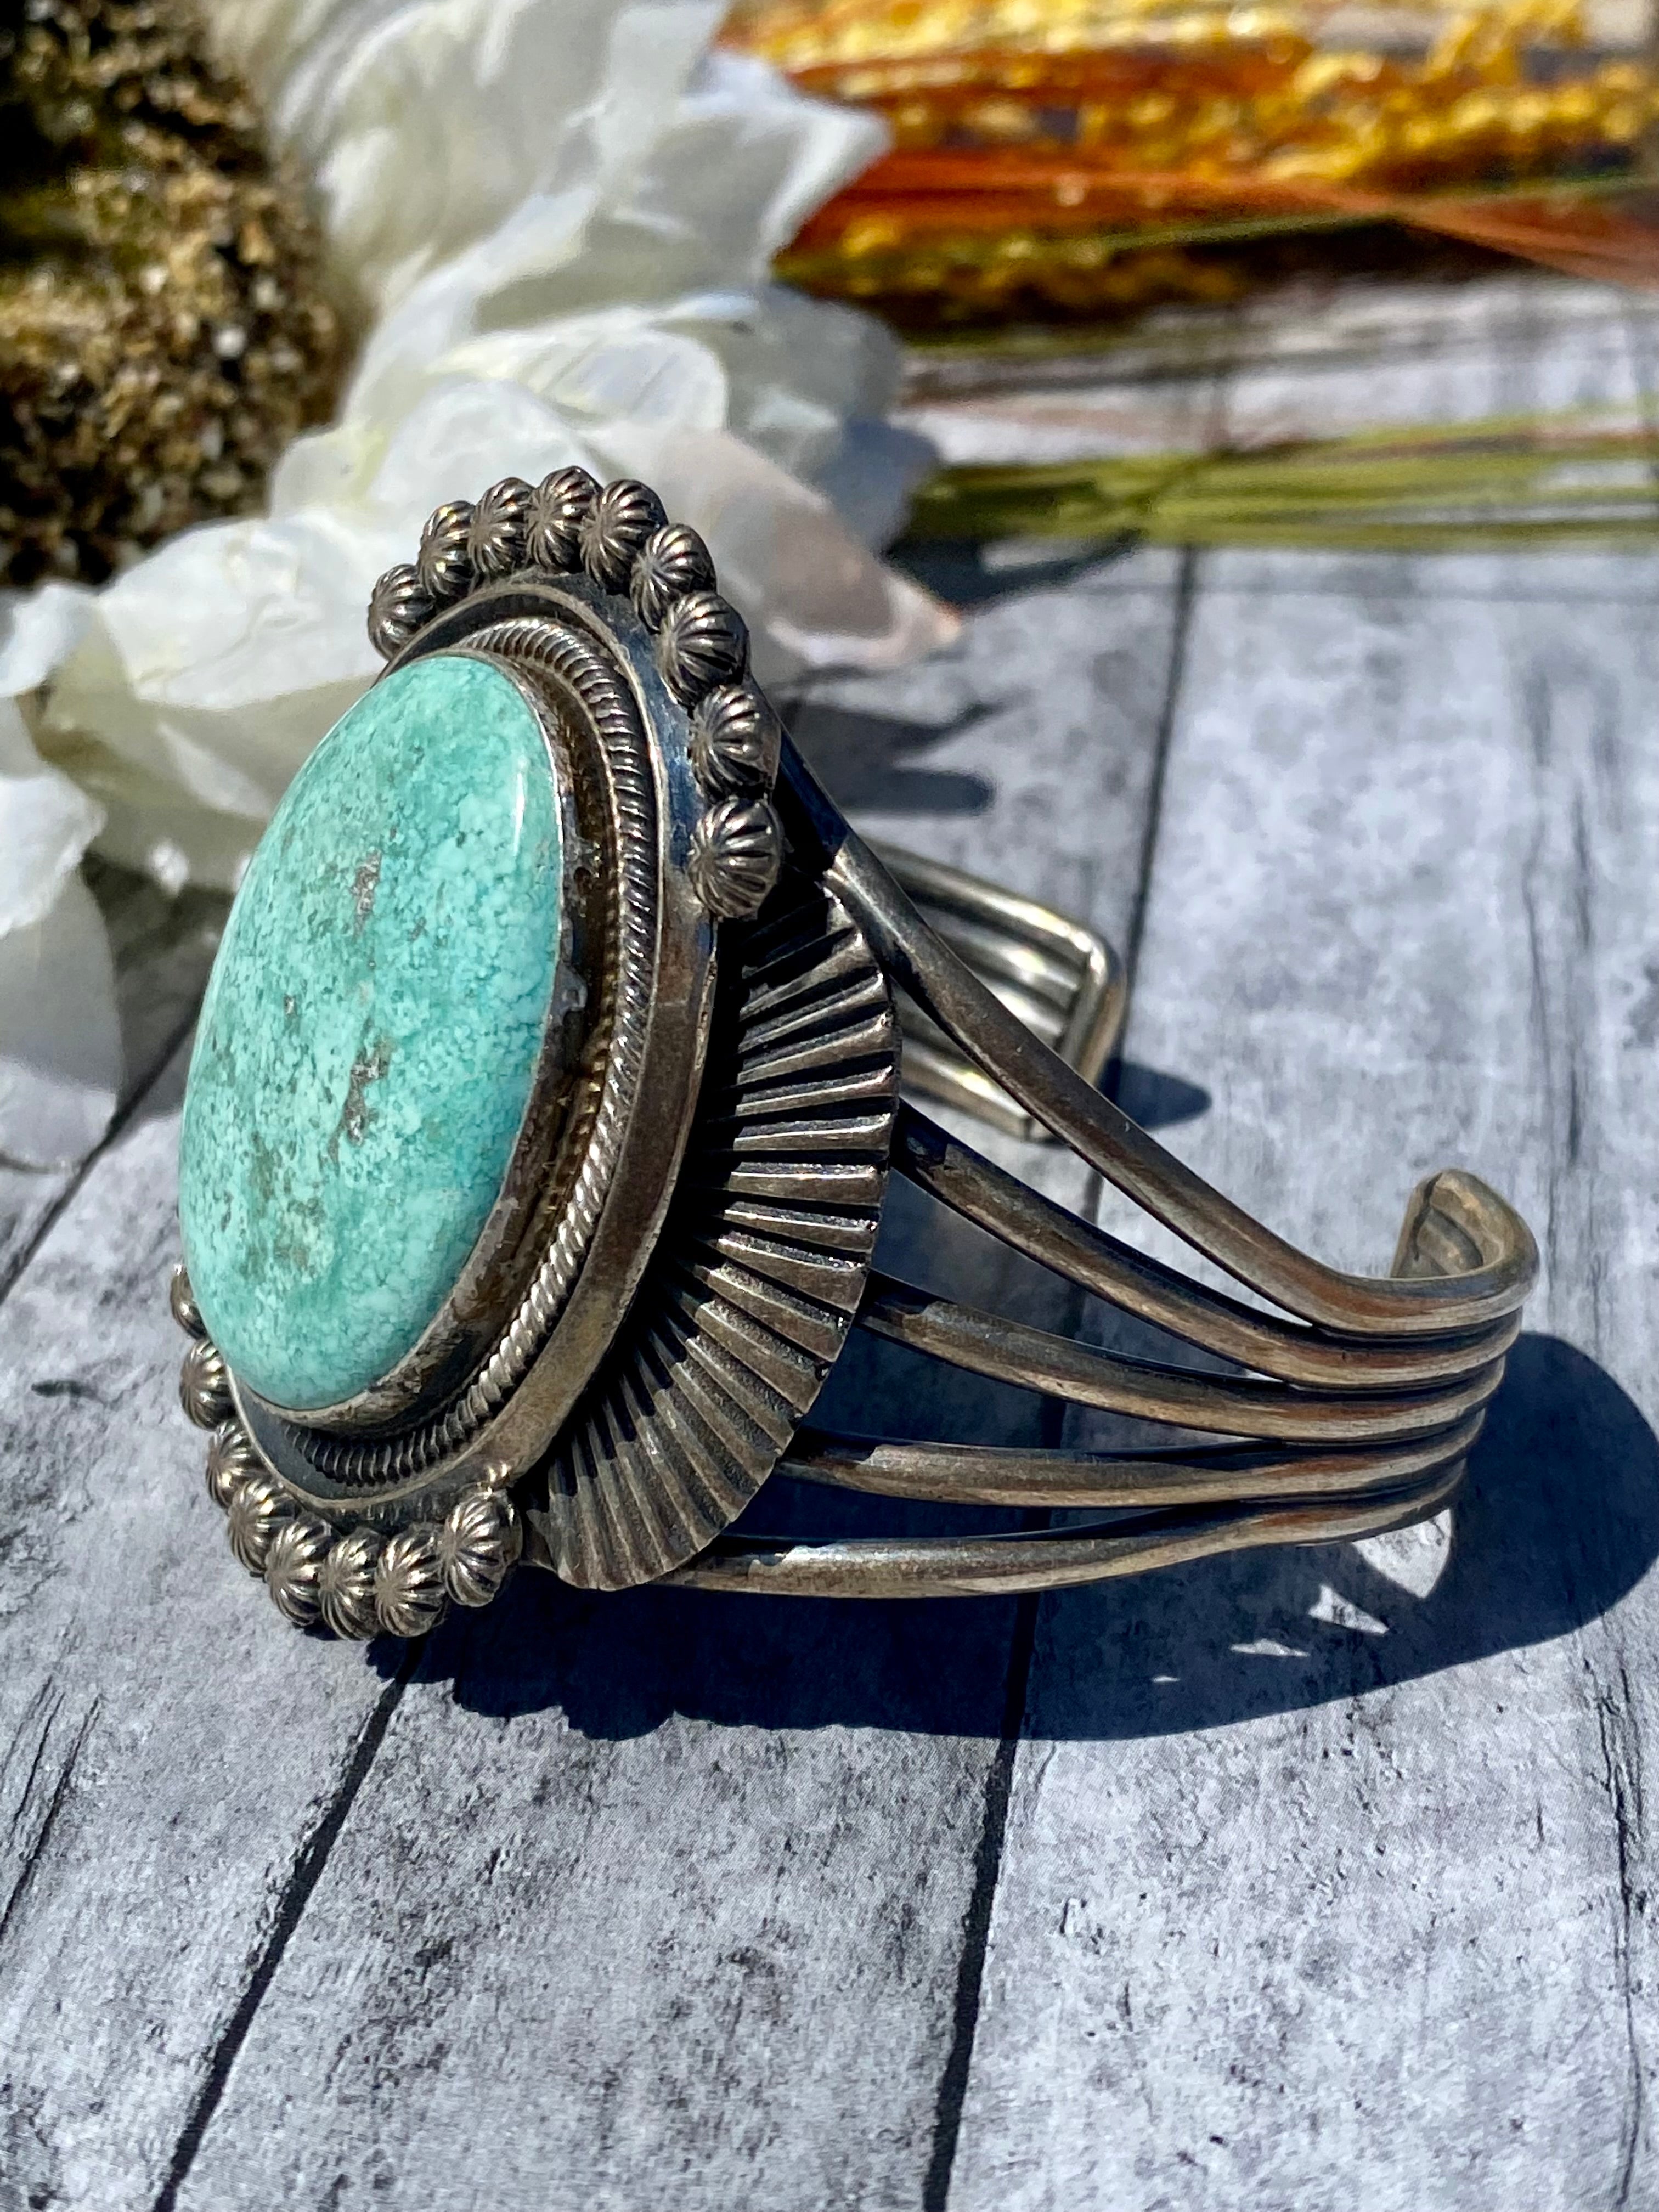 Leon M.T.Z. Navajo Made Carico Lake Turquoise & Sterling Silver Cuff Bracelet